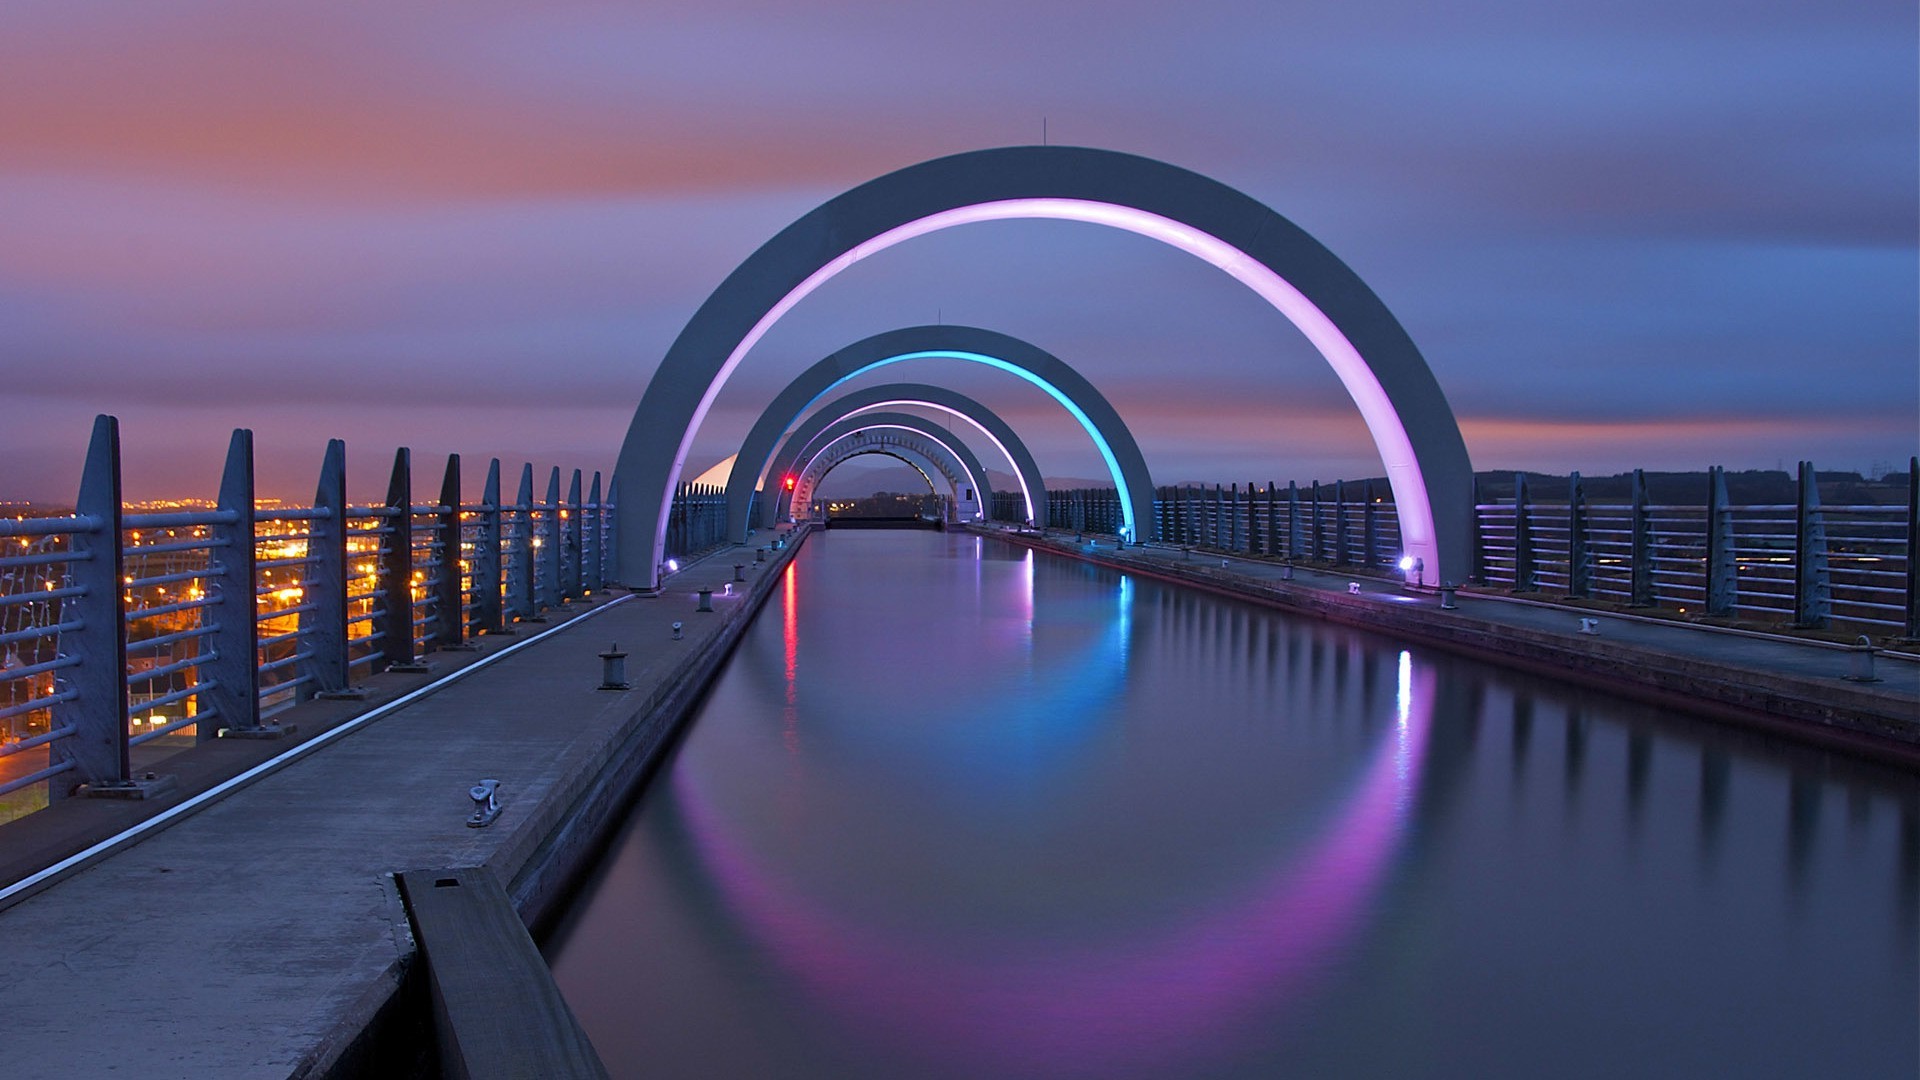 architecture, Water, Canal, Wheels, Falkirk Wheel, Scotland, UK, Reflection, Fence, Clouds, Evening, Lights, Long exposure, Arch Wallpaper